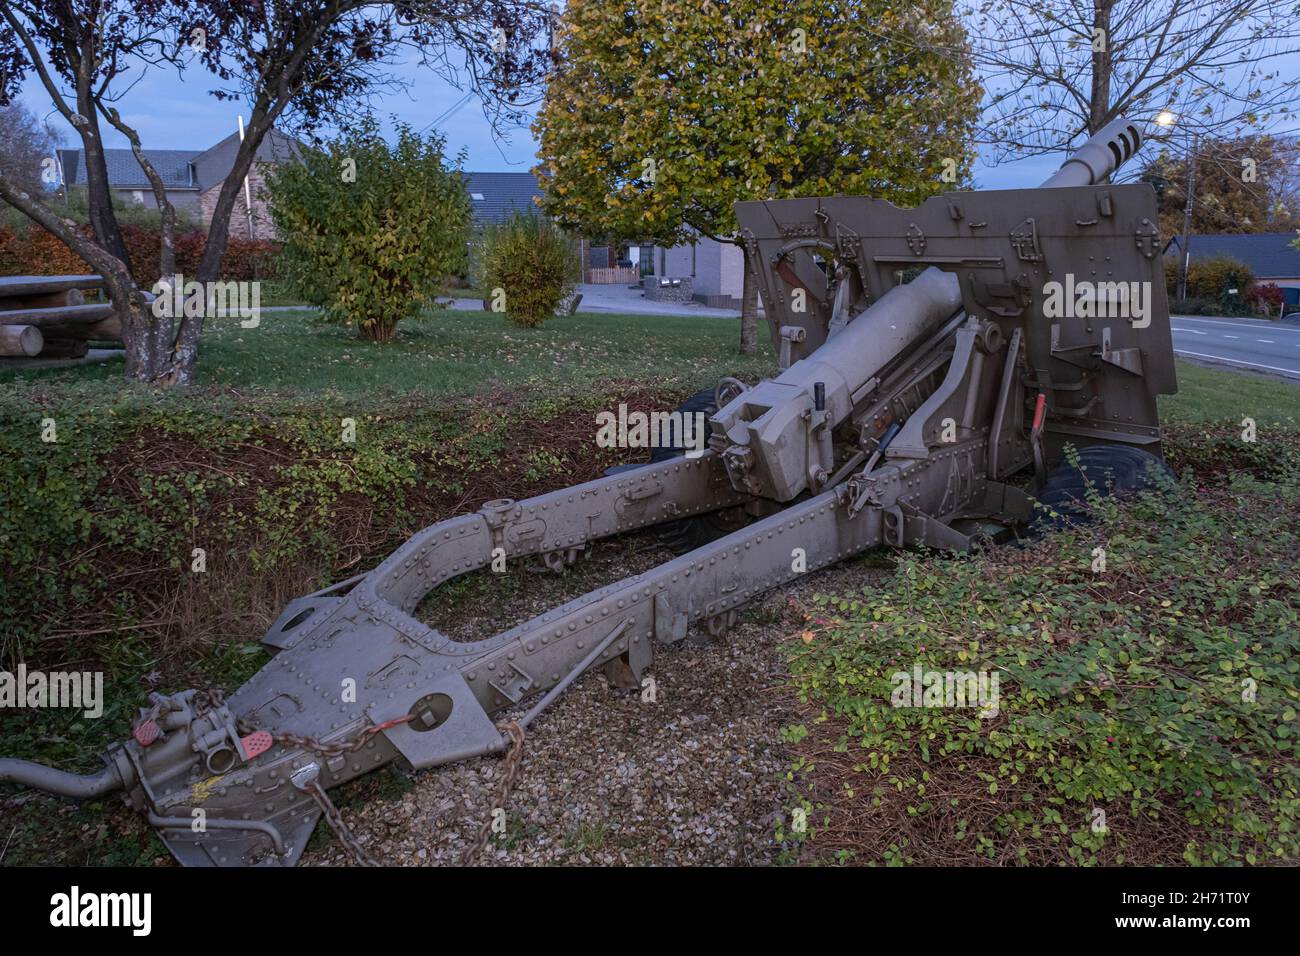 Werbomont, Belgium - November 1, 2021: British Ordnance QF 25 pounder later refitted with a 105mm barrel by both the Belgium and Luxemburgian Army in Stock Photo